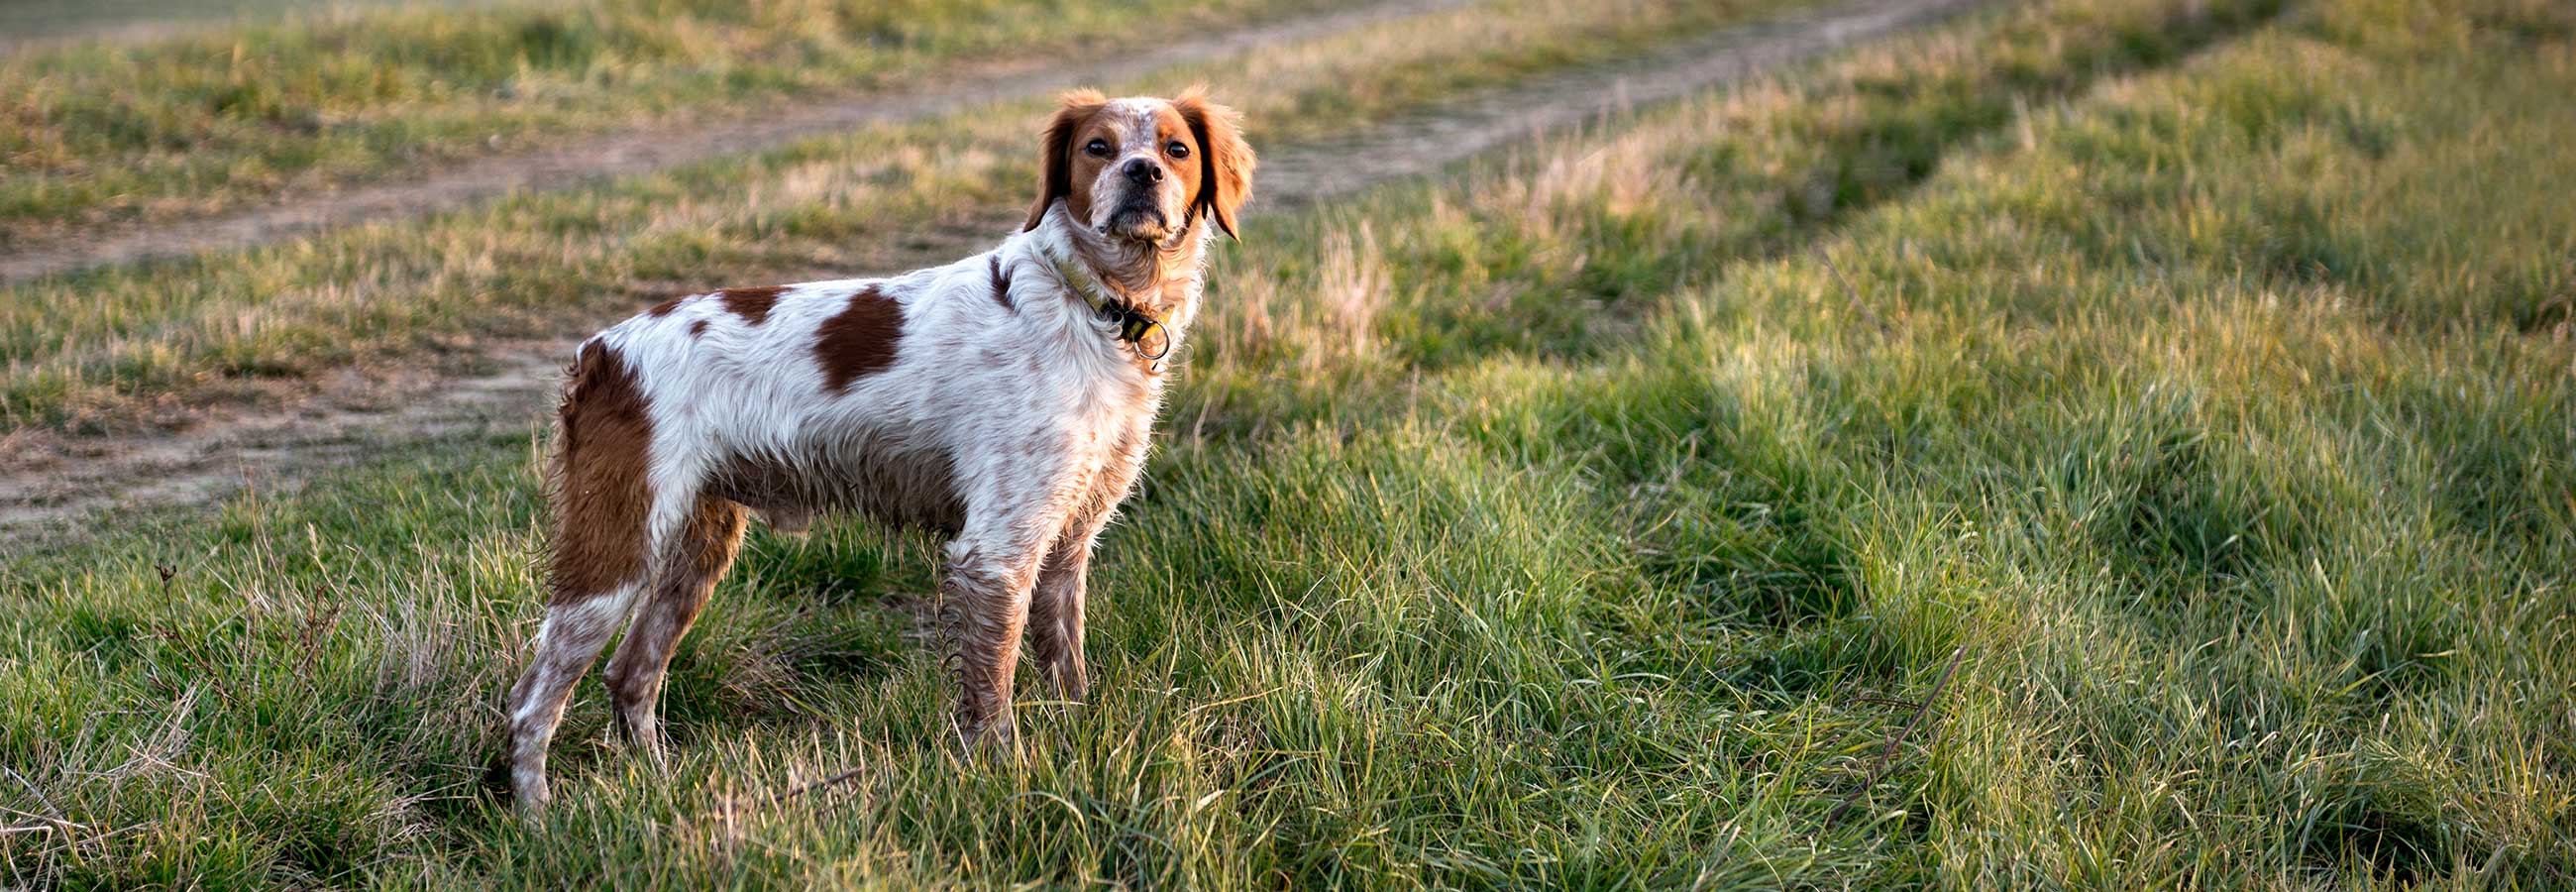 Hunting bird dog standing in a field at sunrise